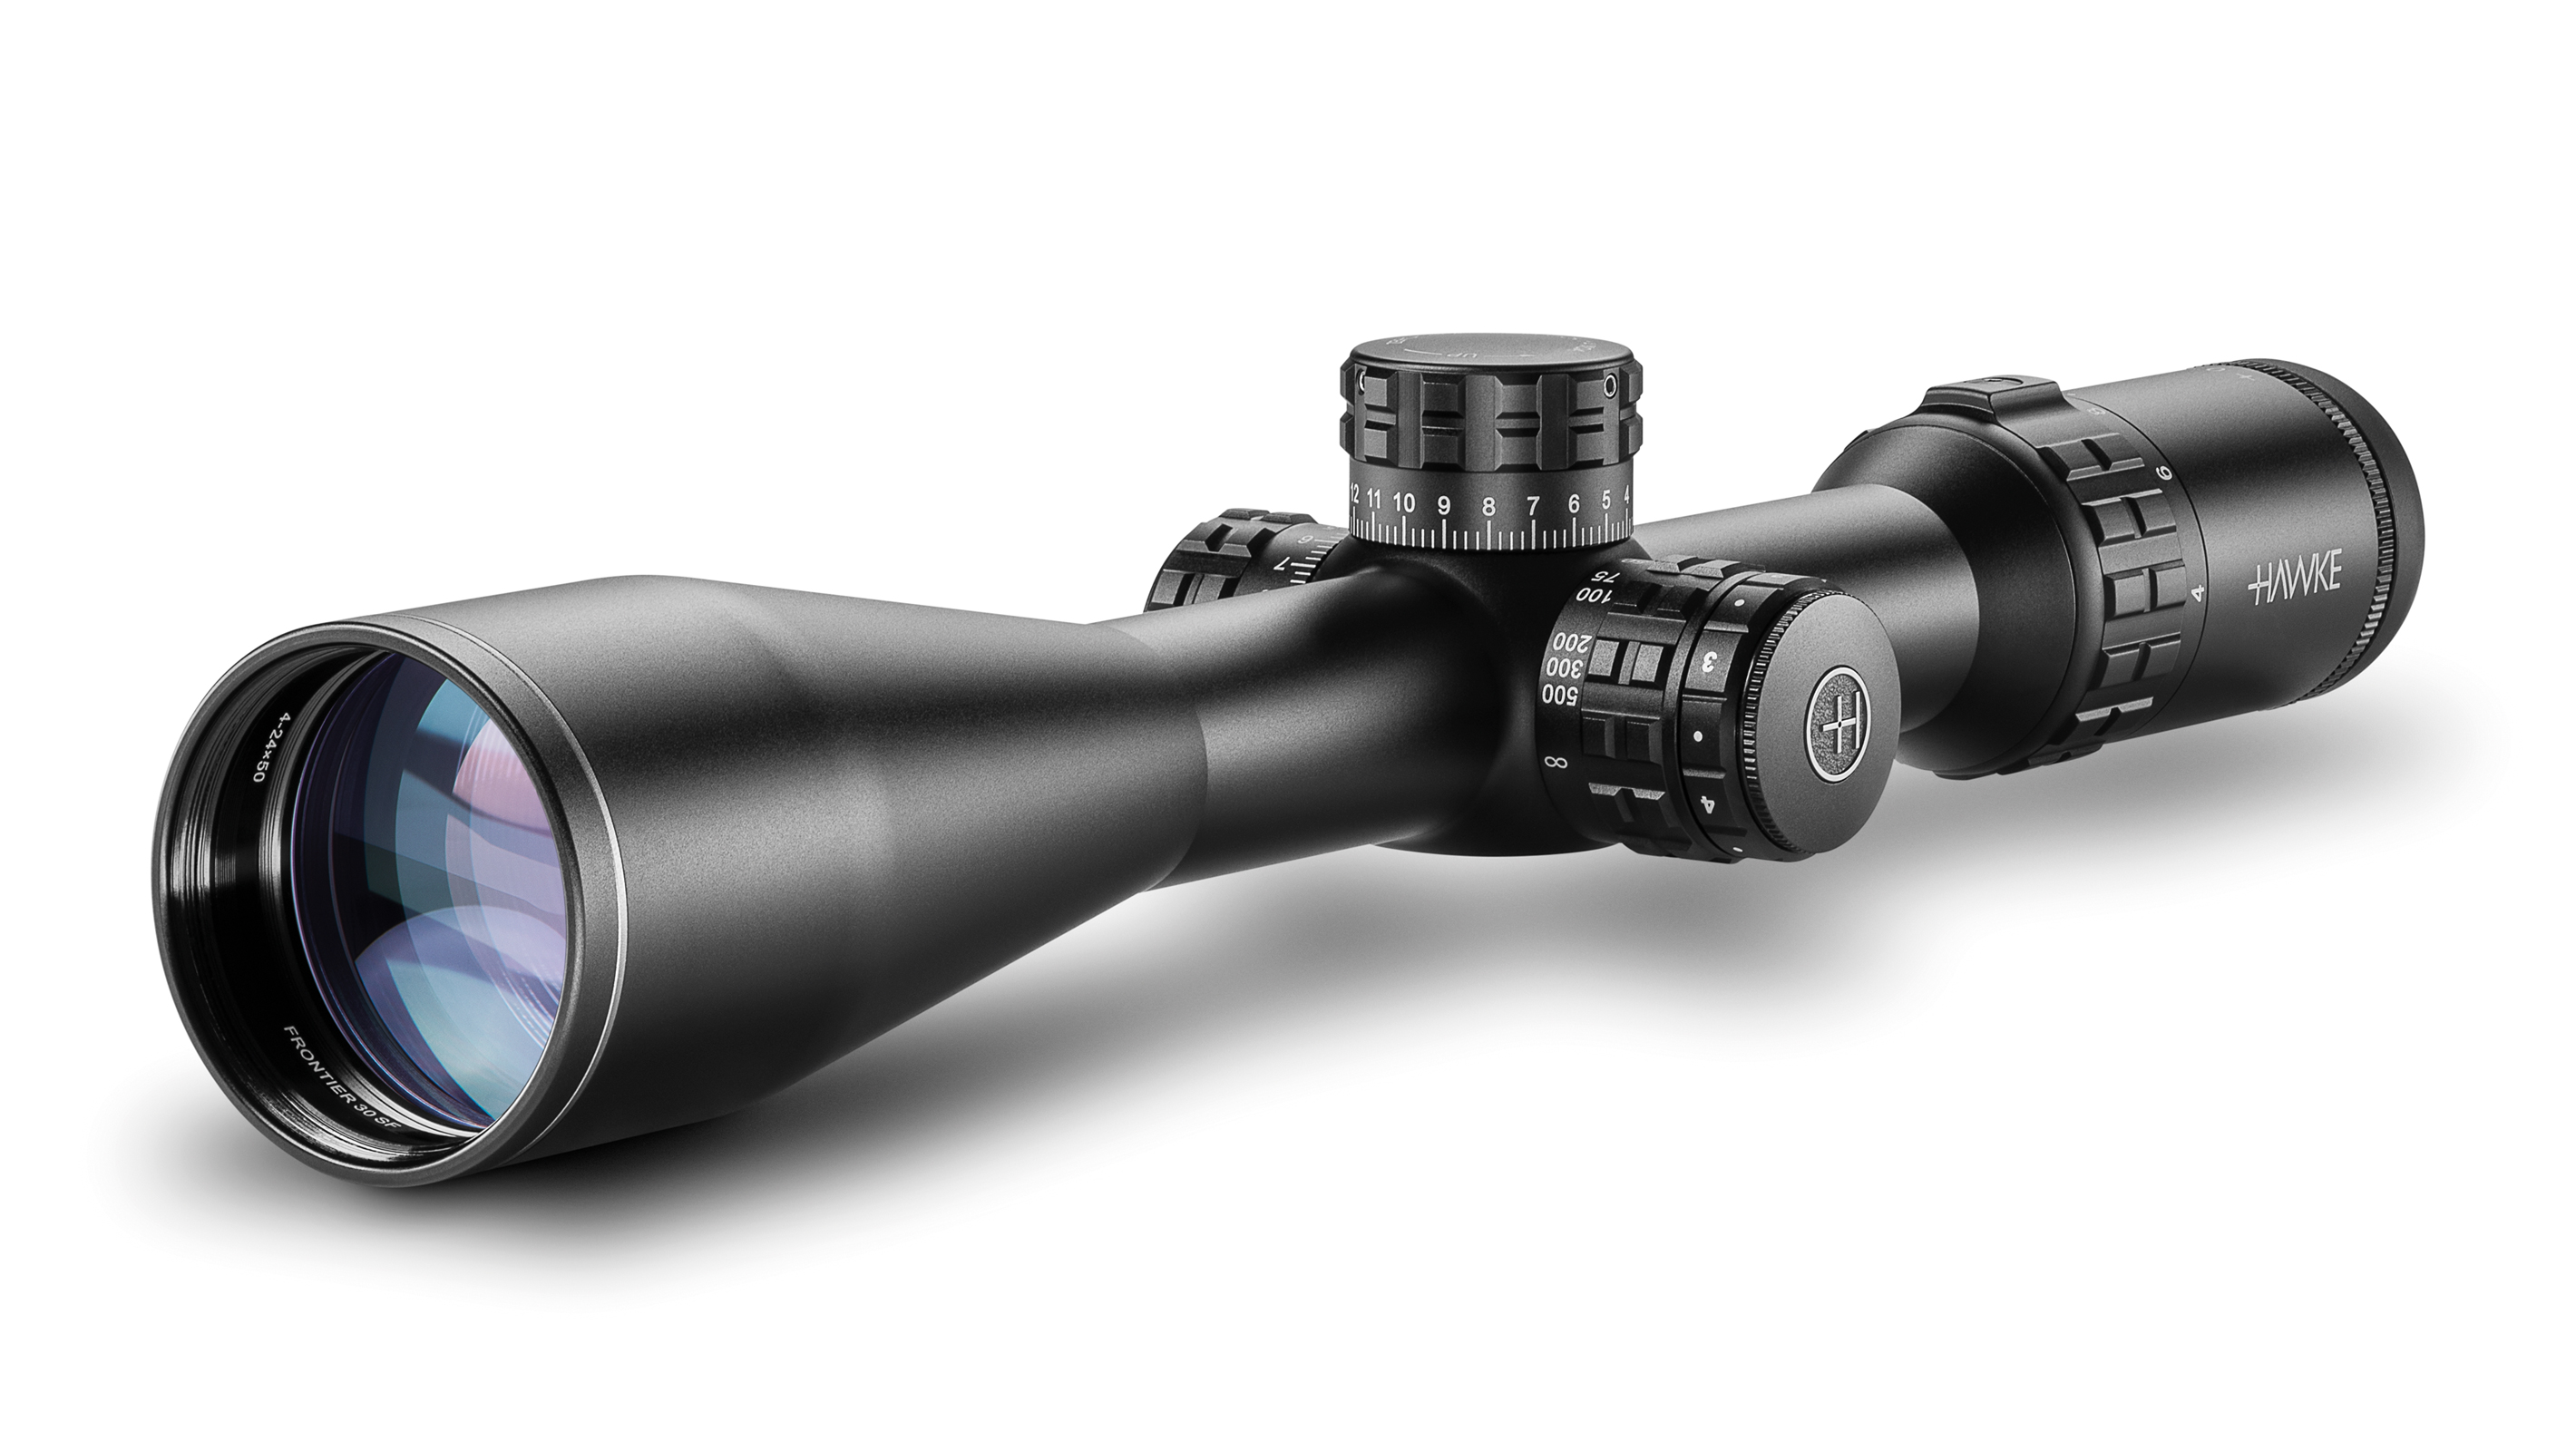 Ocular End View Of The Hawke Frontier 30 SF 4-24x50 LR Dot Rifle Scope